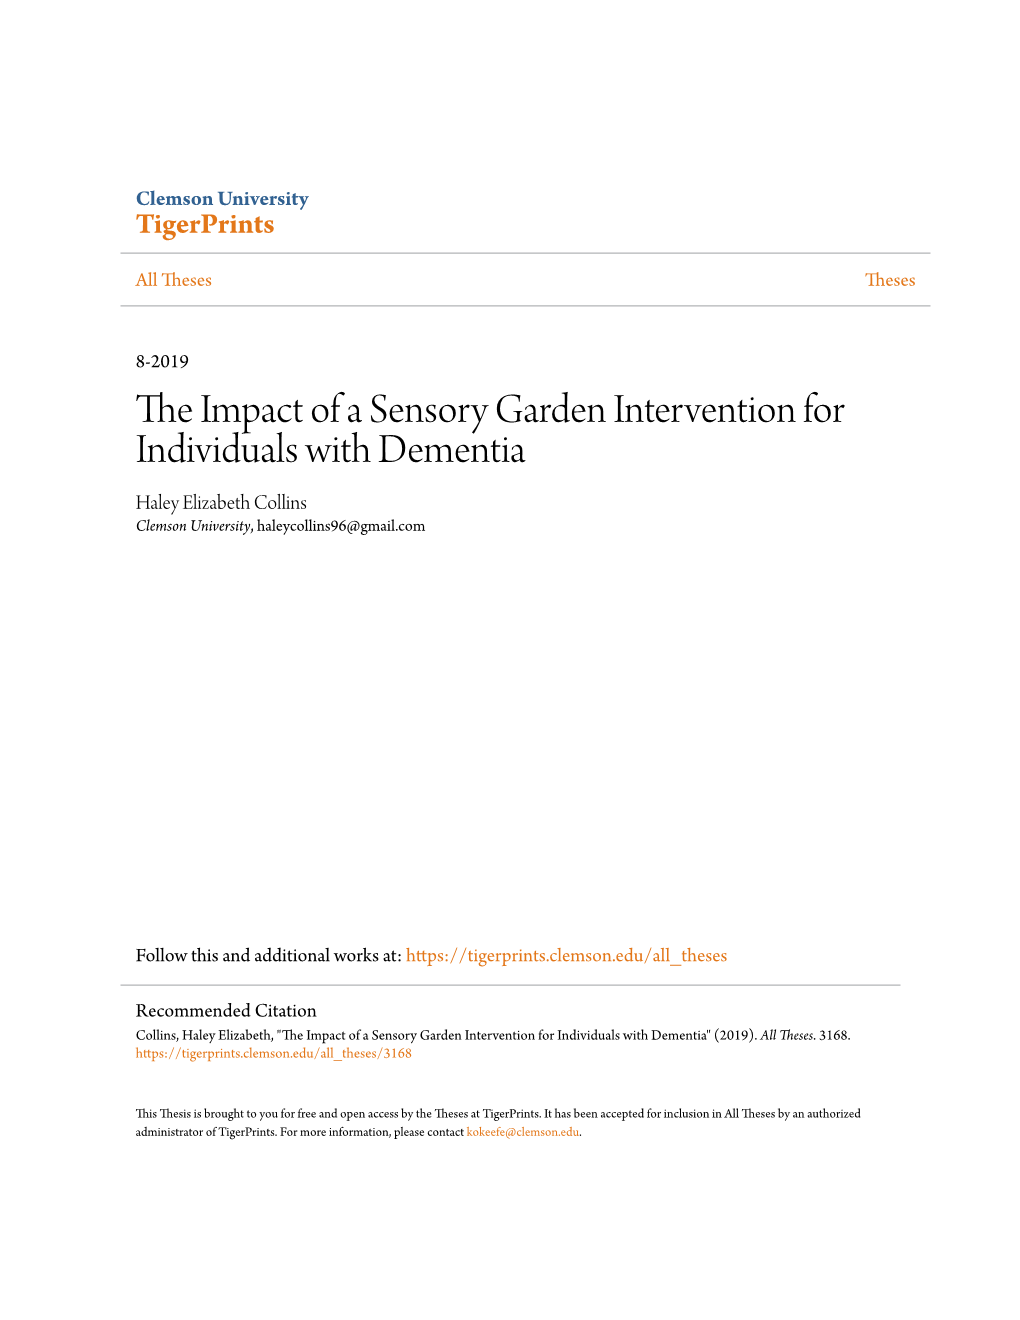 The Impact of a Sensory Garden Intervention for Individuals with Dementia